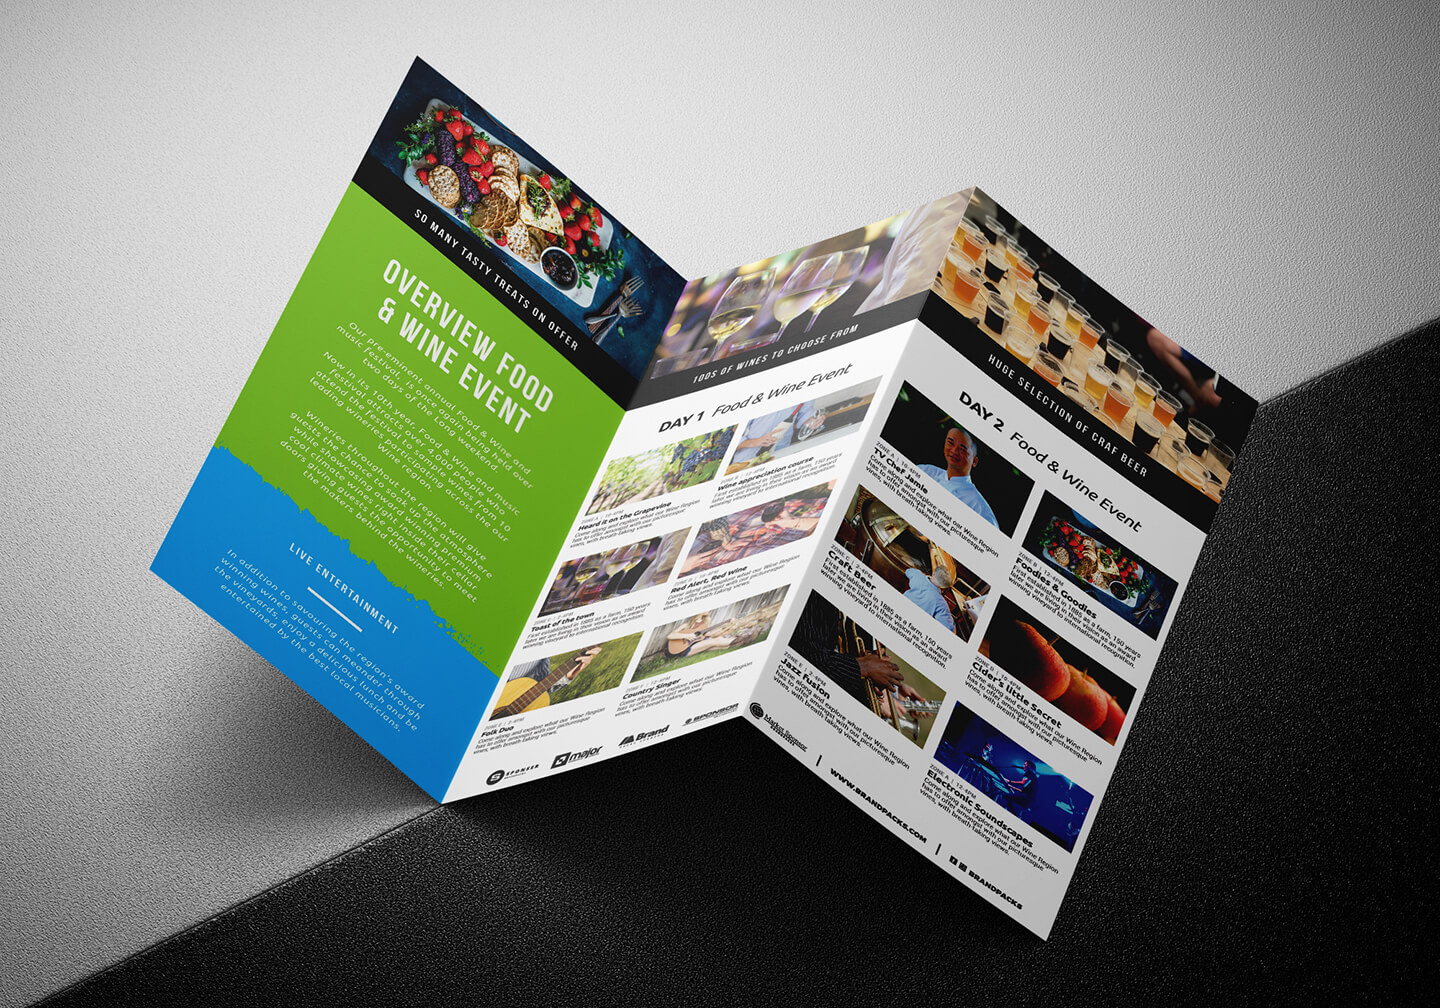 Free Tri Fold Brochure Template For Events & Festivals - Psd With Regard To Adobe Illustrator Tri Fold Brochure Template